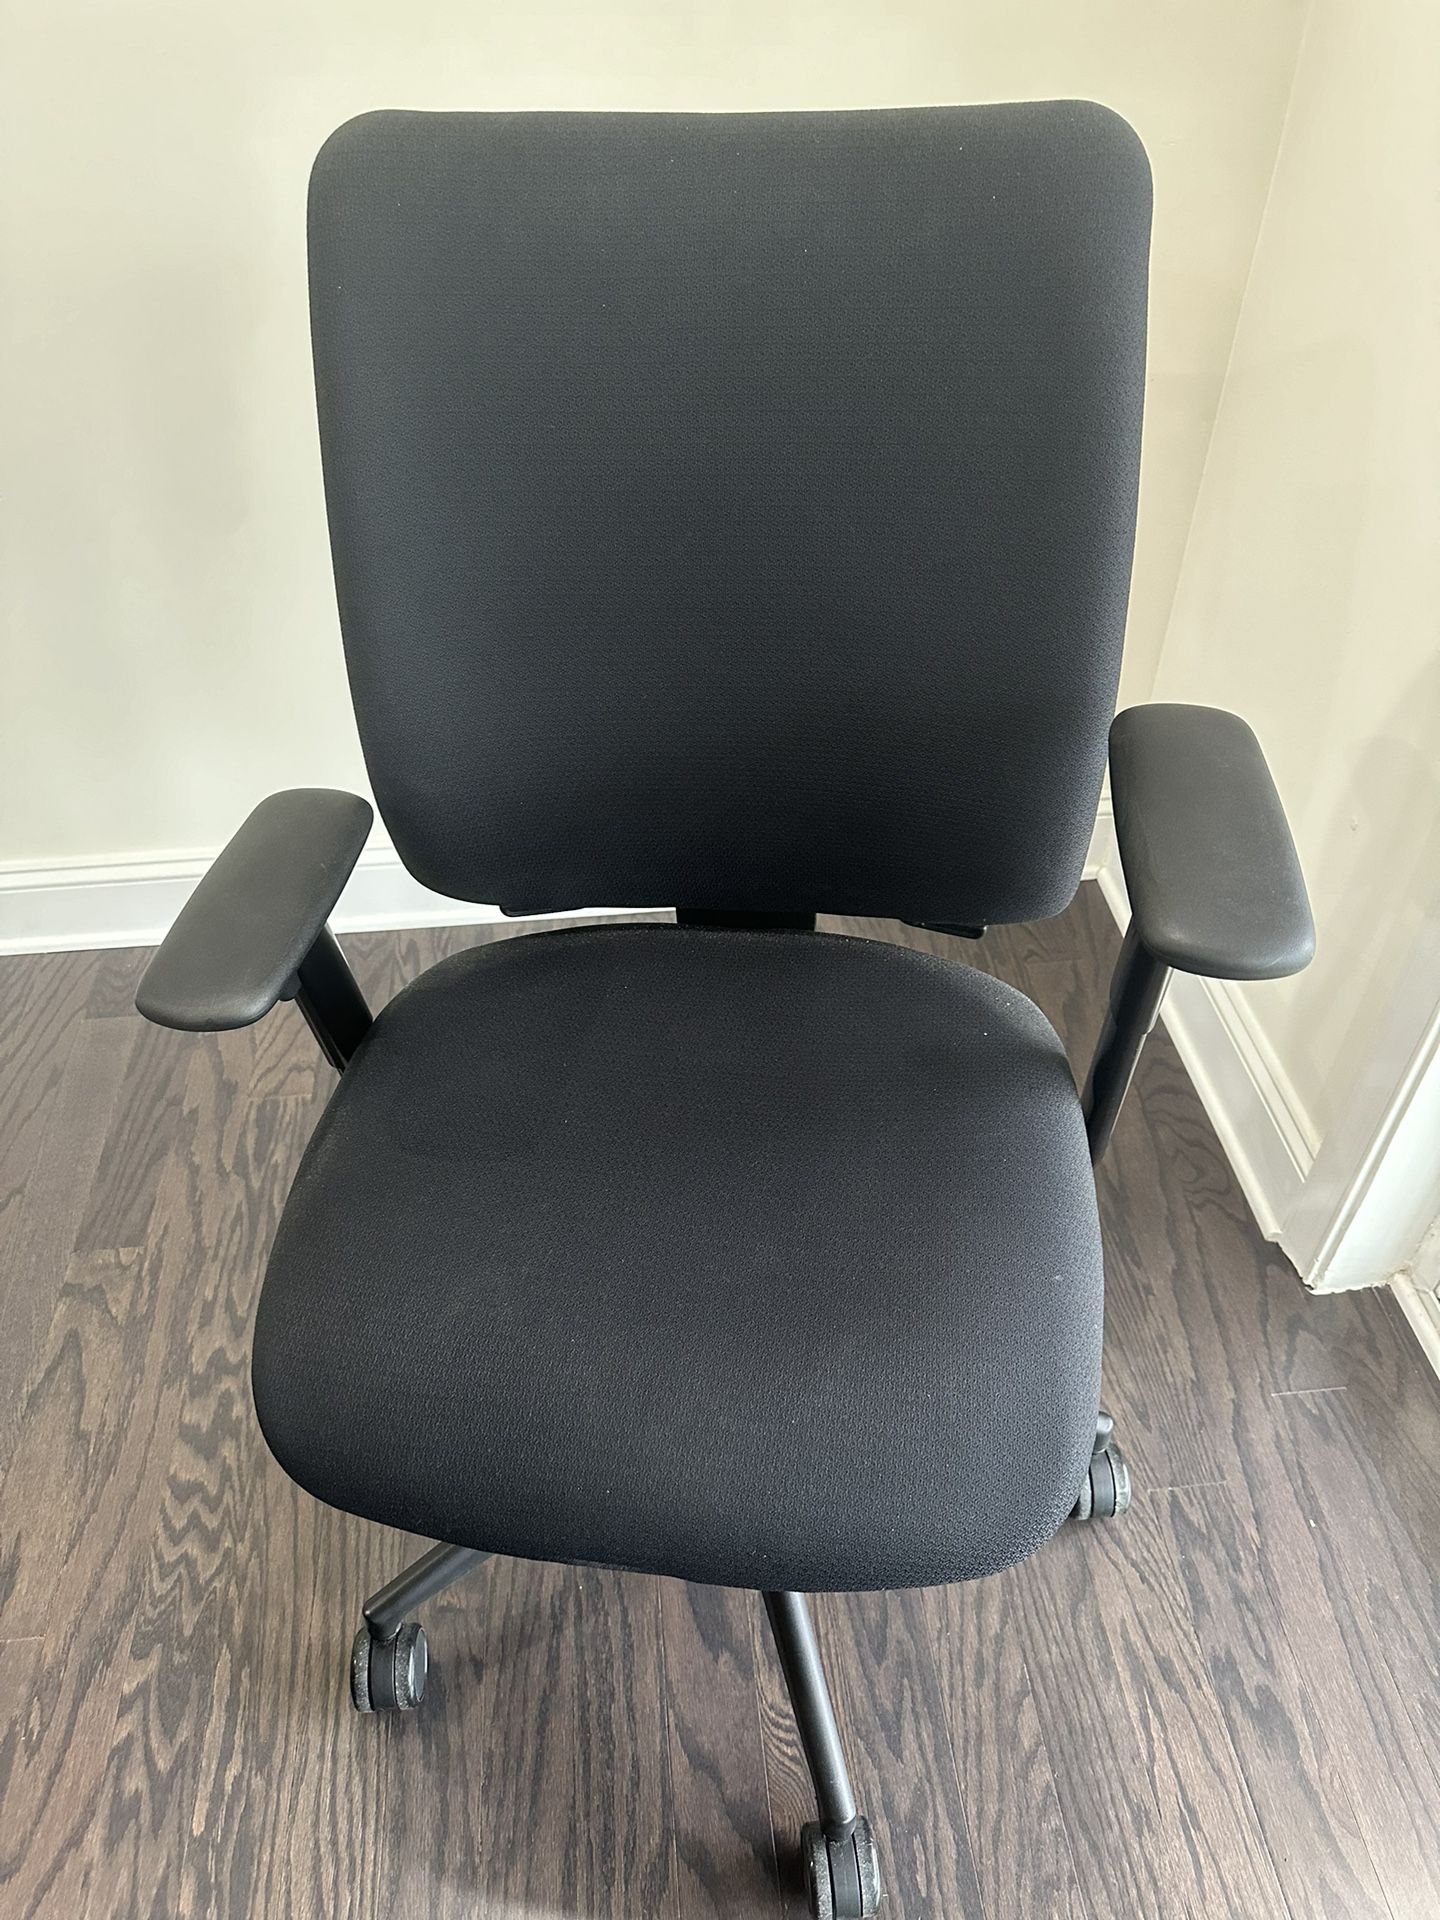 6 Office Chairs